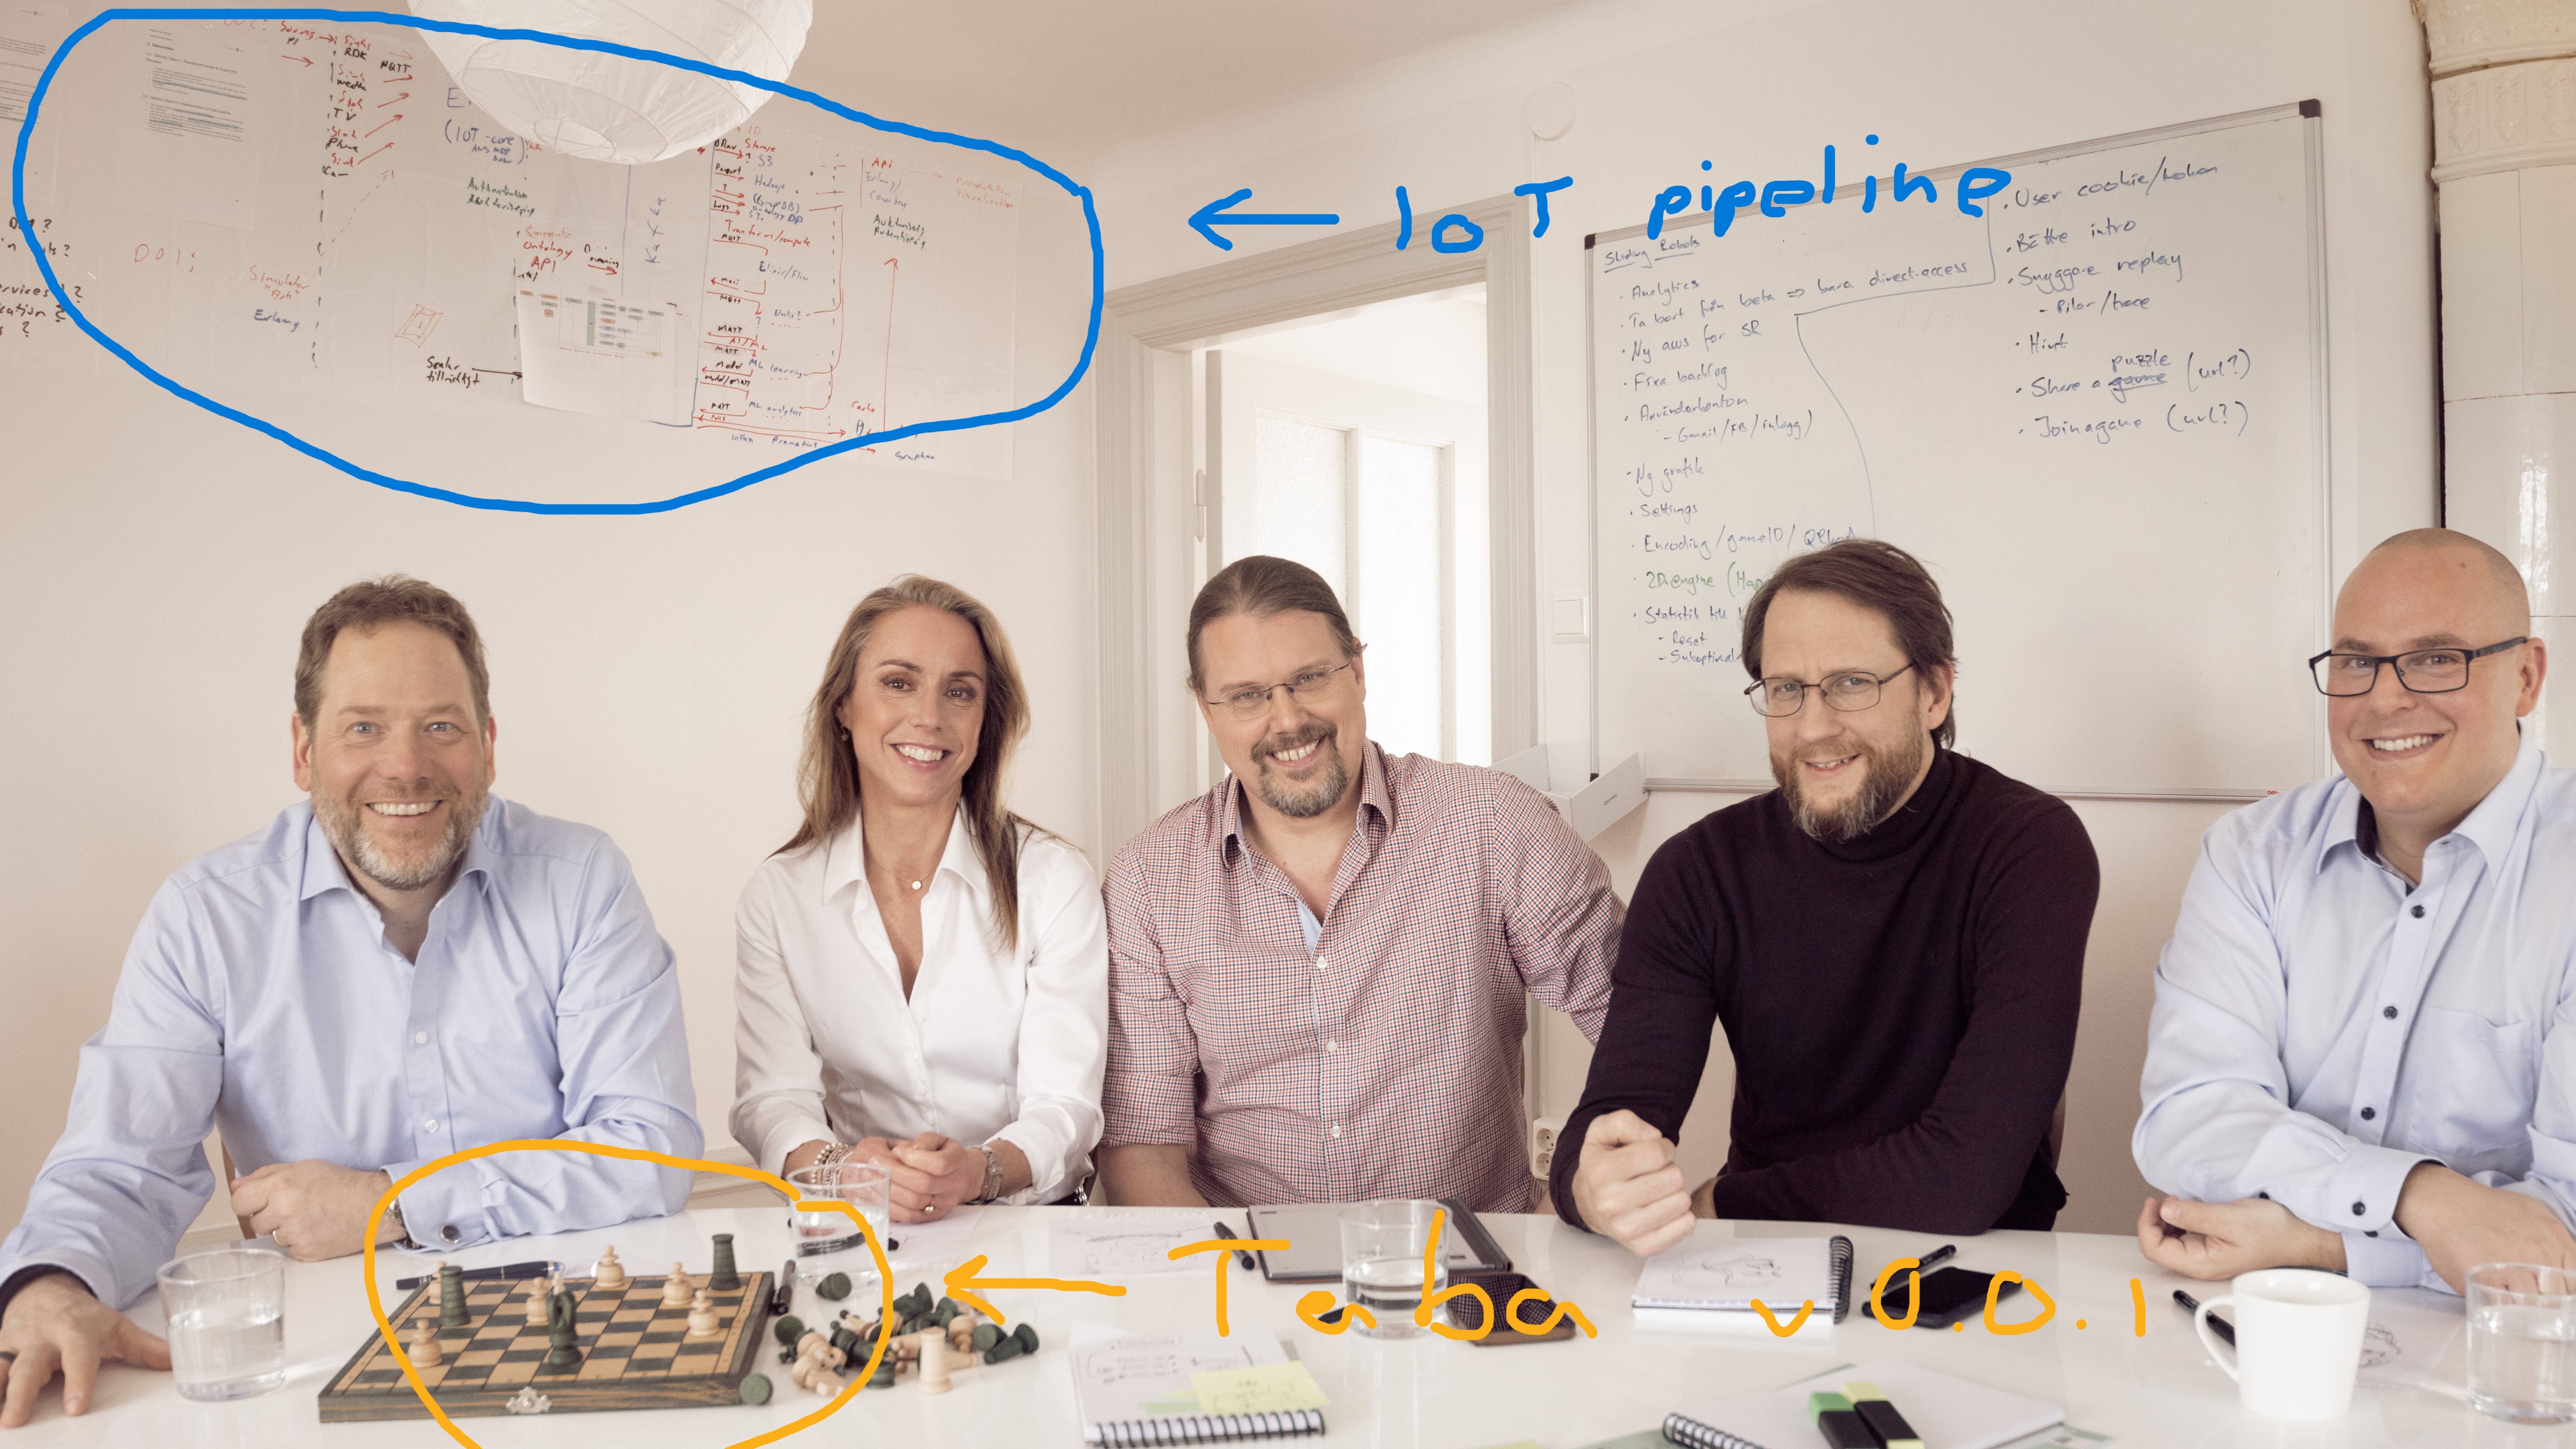 The team with the IoT pipeline on a whiteboard in the background.